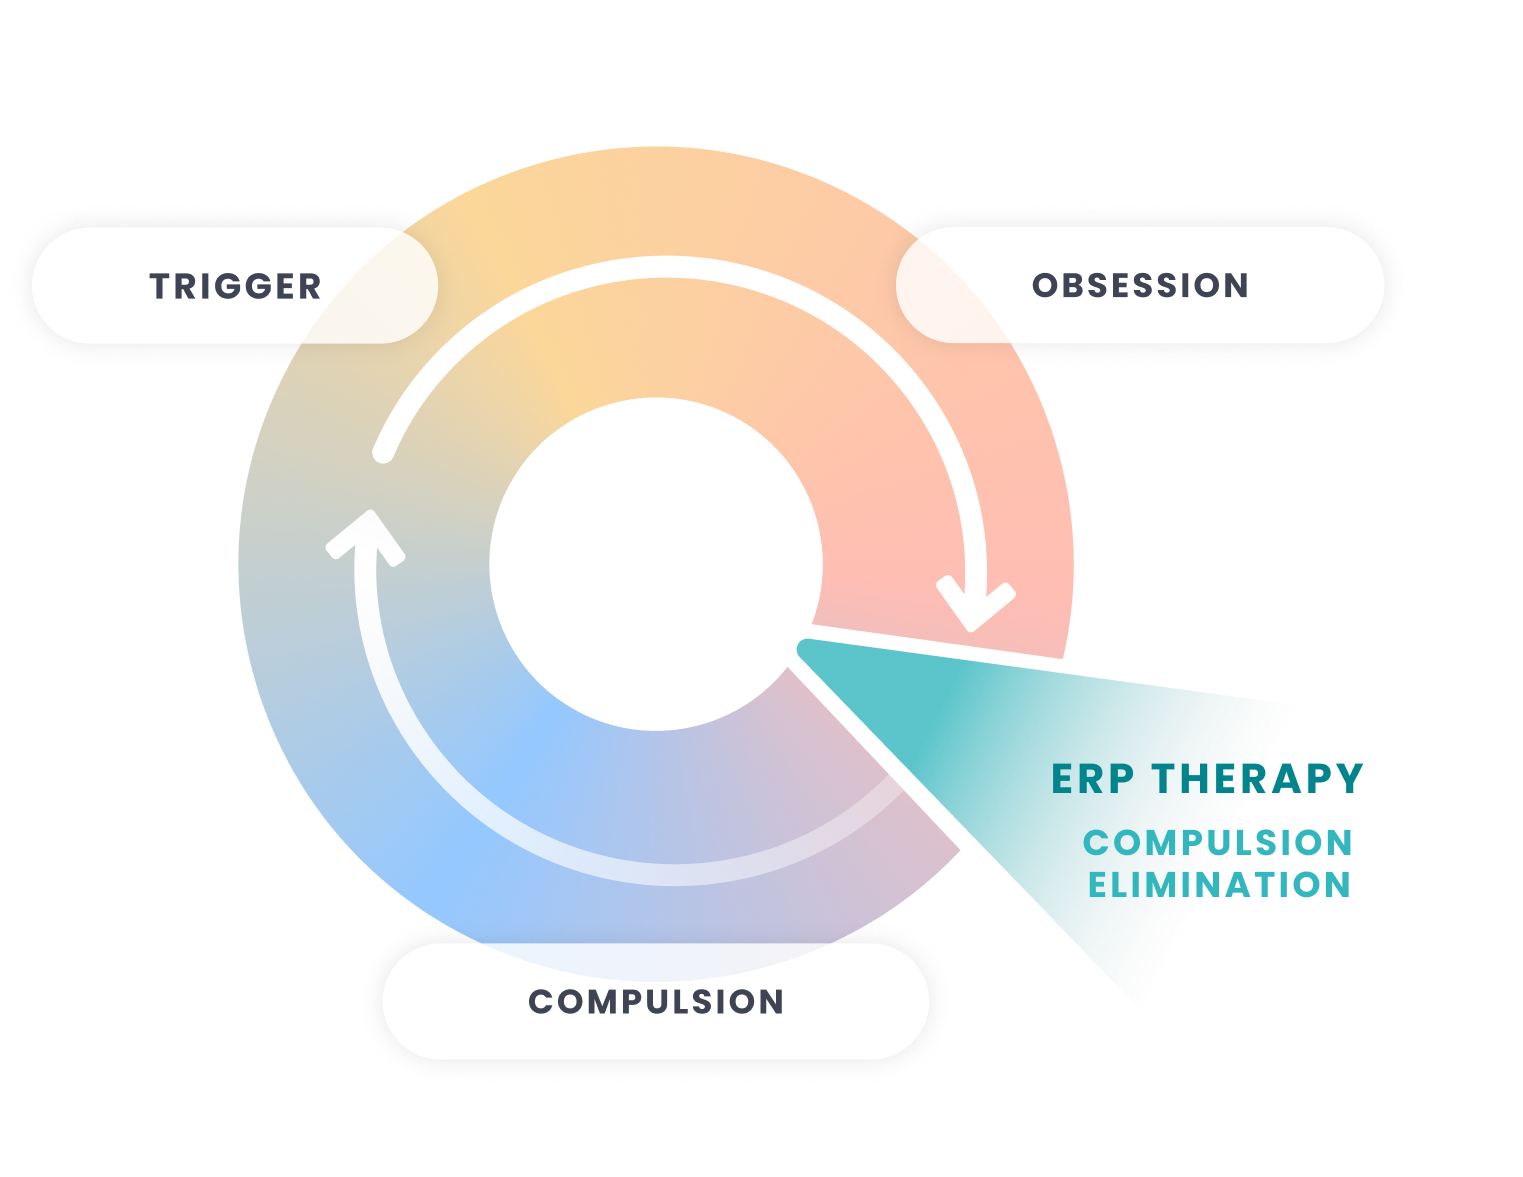 Illustration of how ERP therapy stops the cycle of triggers, obsessions, and compulsions.